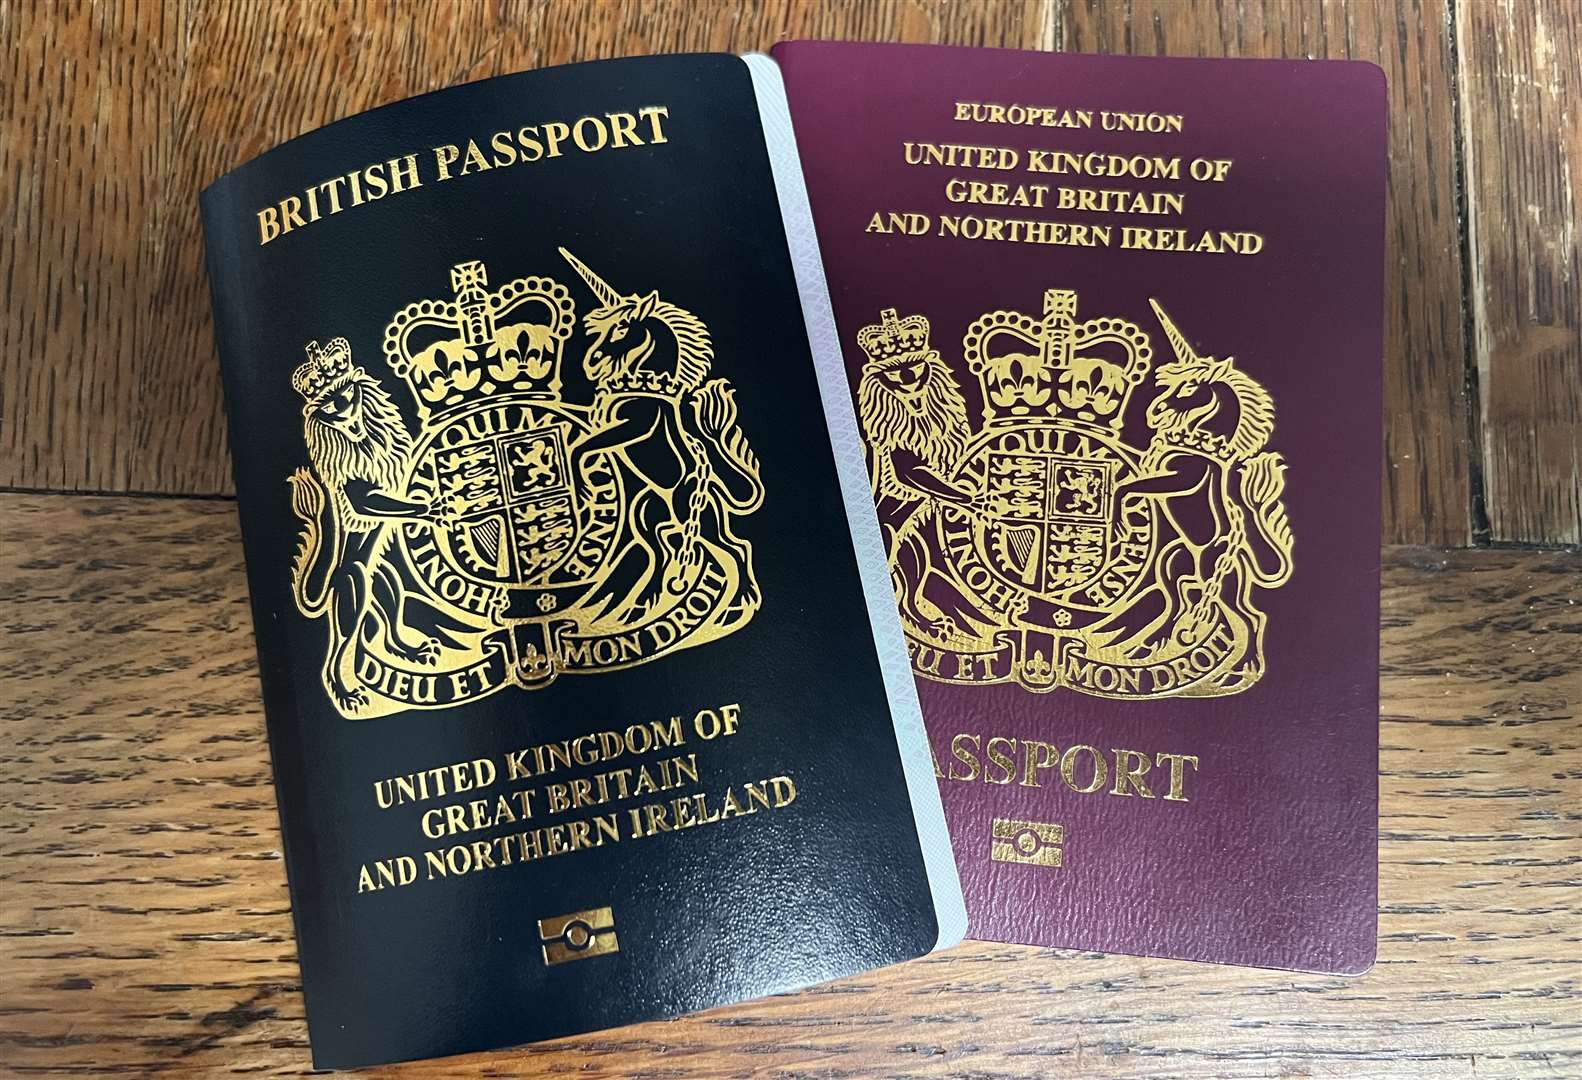 Passports of recent times take more pre-planning, money and patience, to obtain